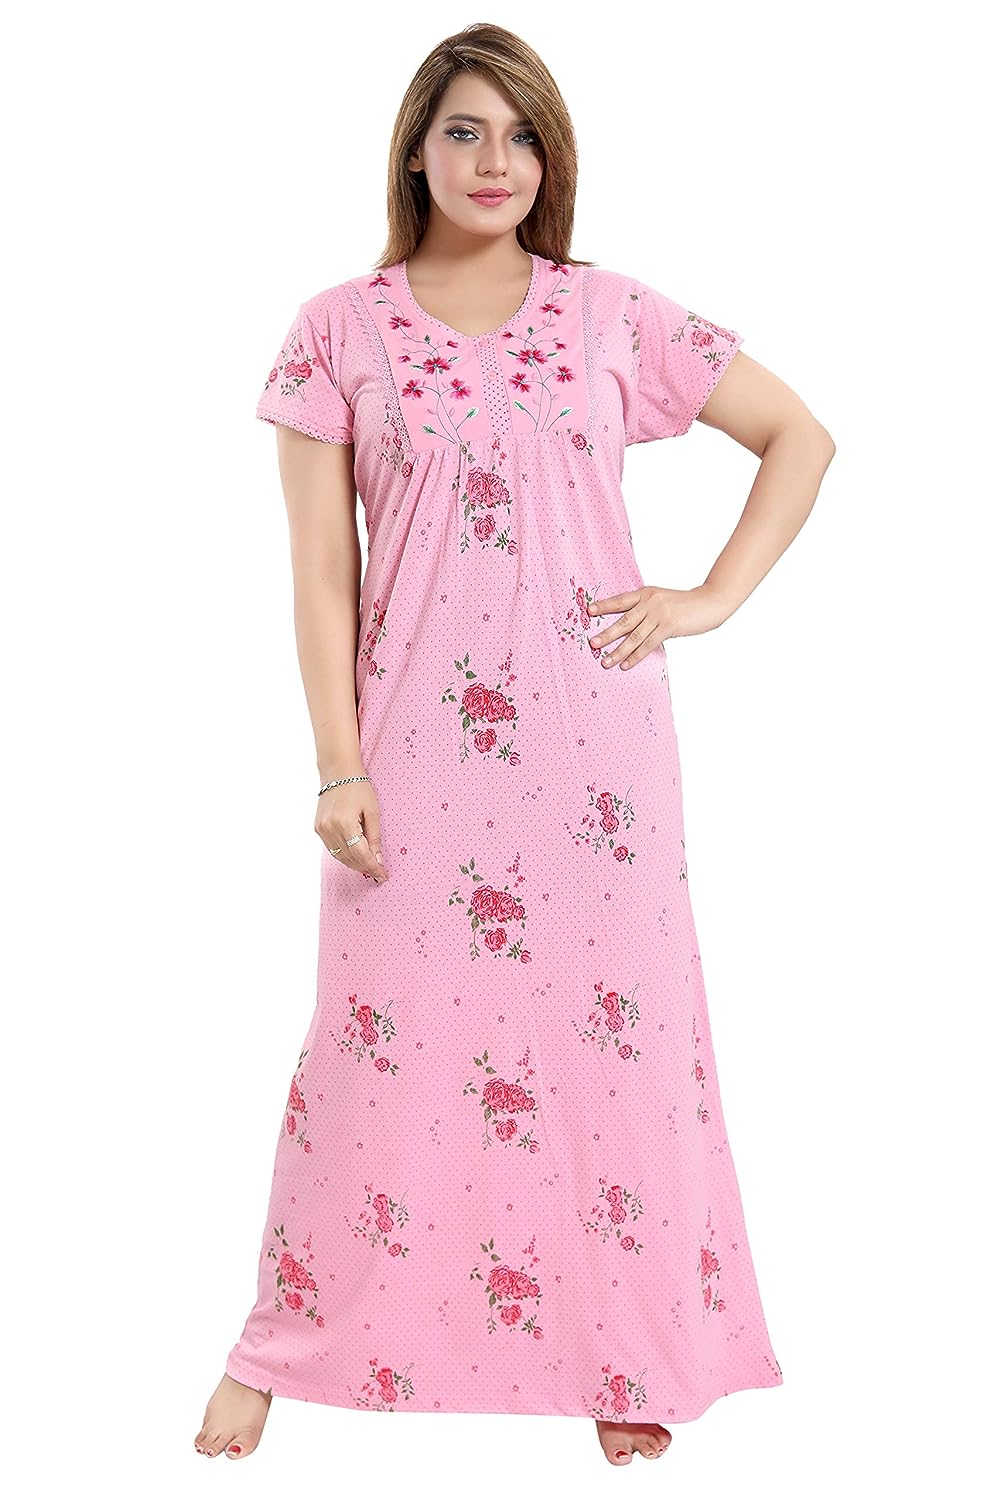 Long Length Half Sleeves And Front Button Closure Soft Cotton Ladies Night  Gown at Best Price in Kolkata | Eenakshi Enterprise